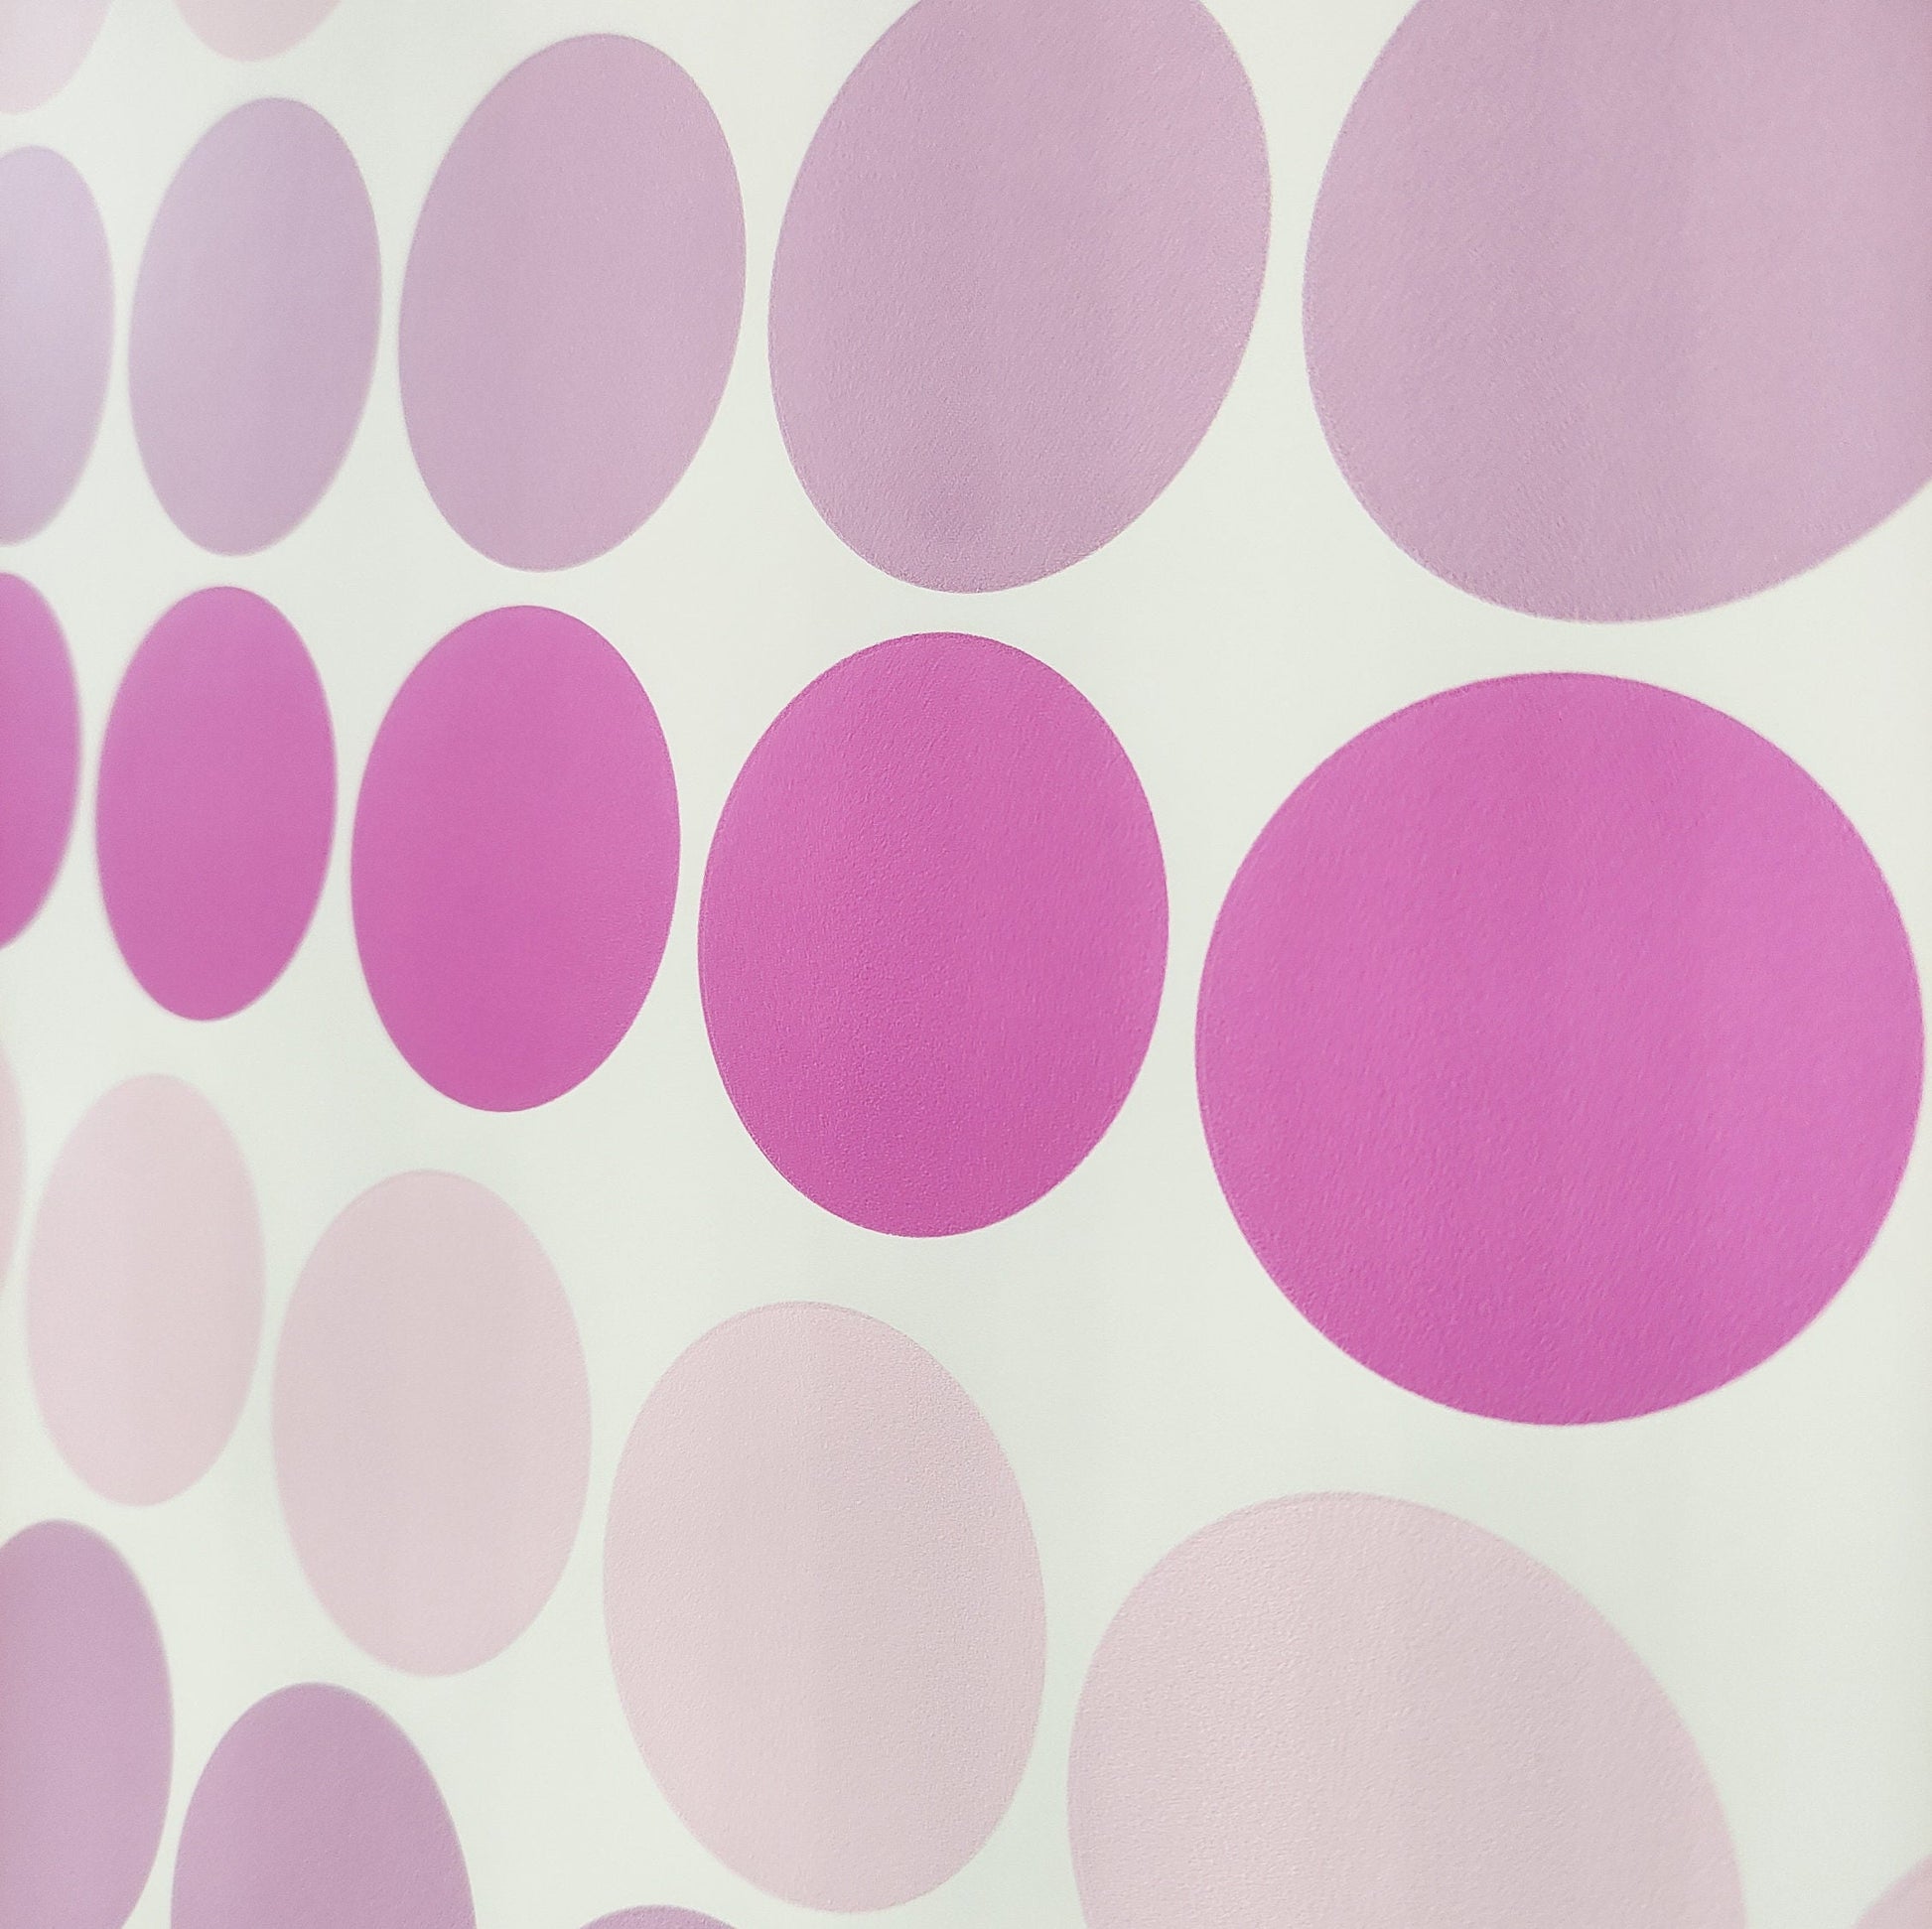 Pink Shades Colour Polka Dot Wall Stickers Decals